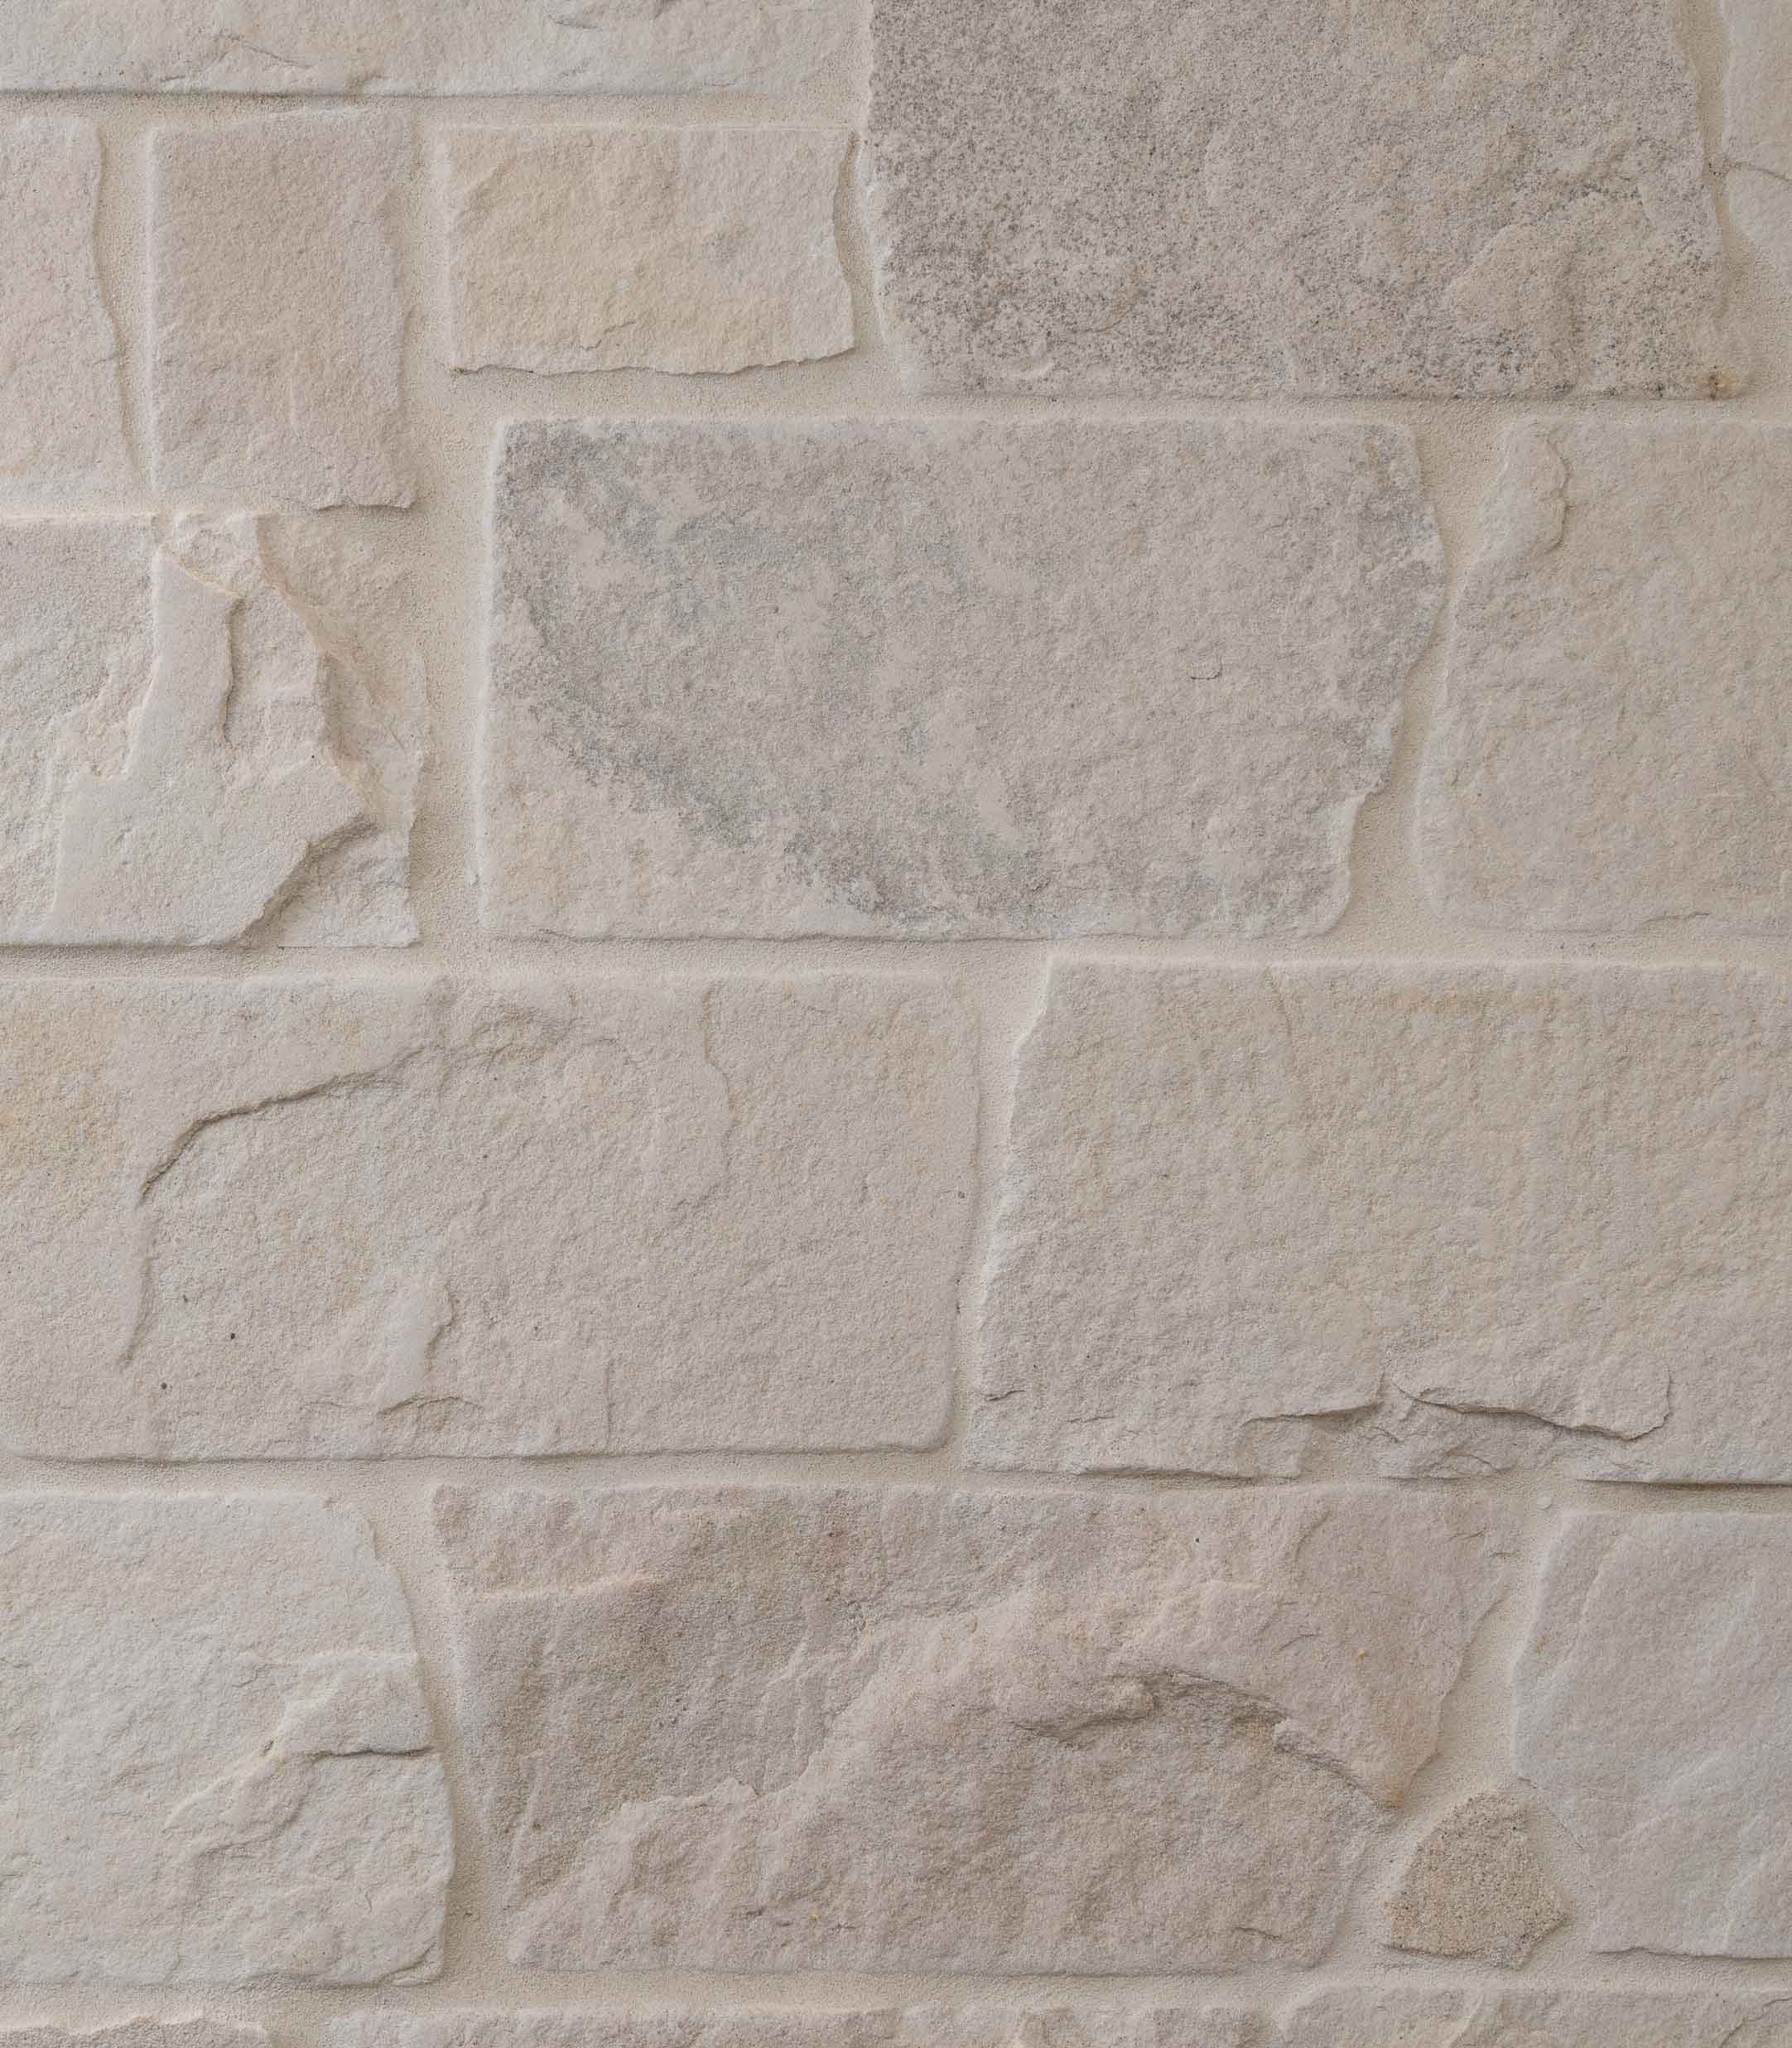 Cream-toned tumbled sandstone wall with tonal grouting.